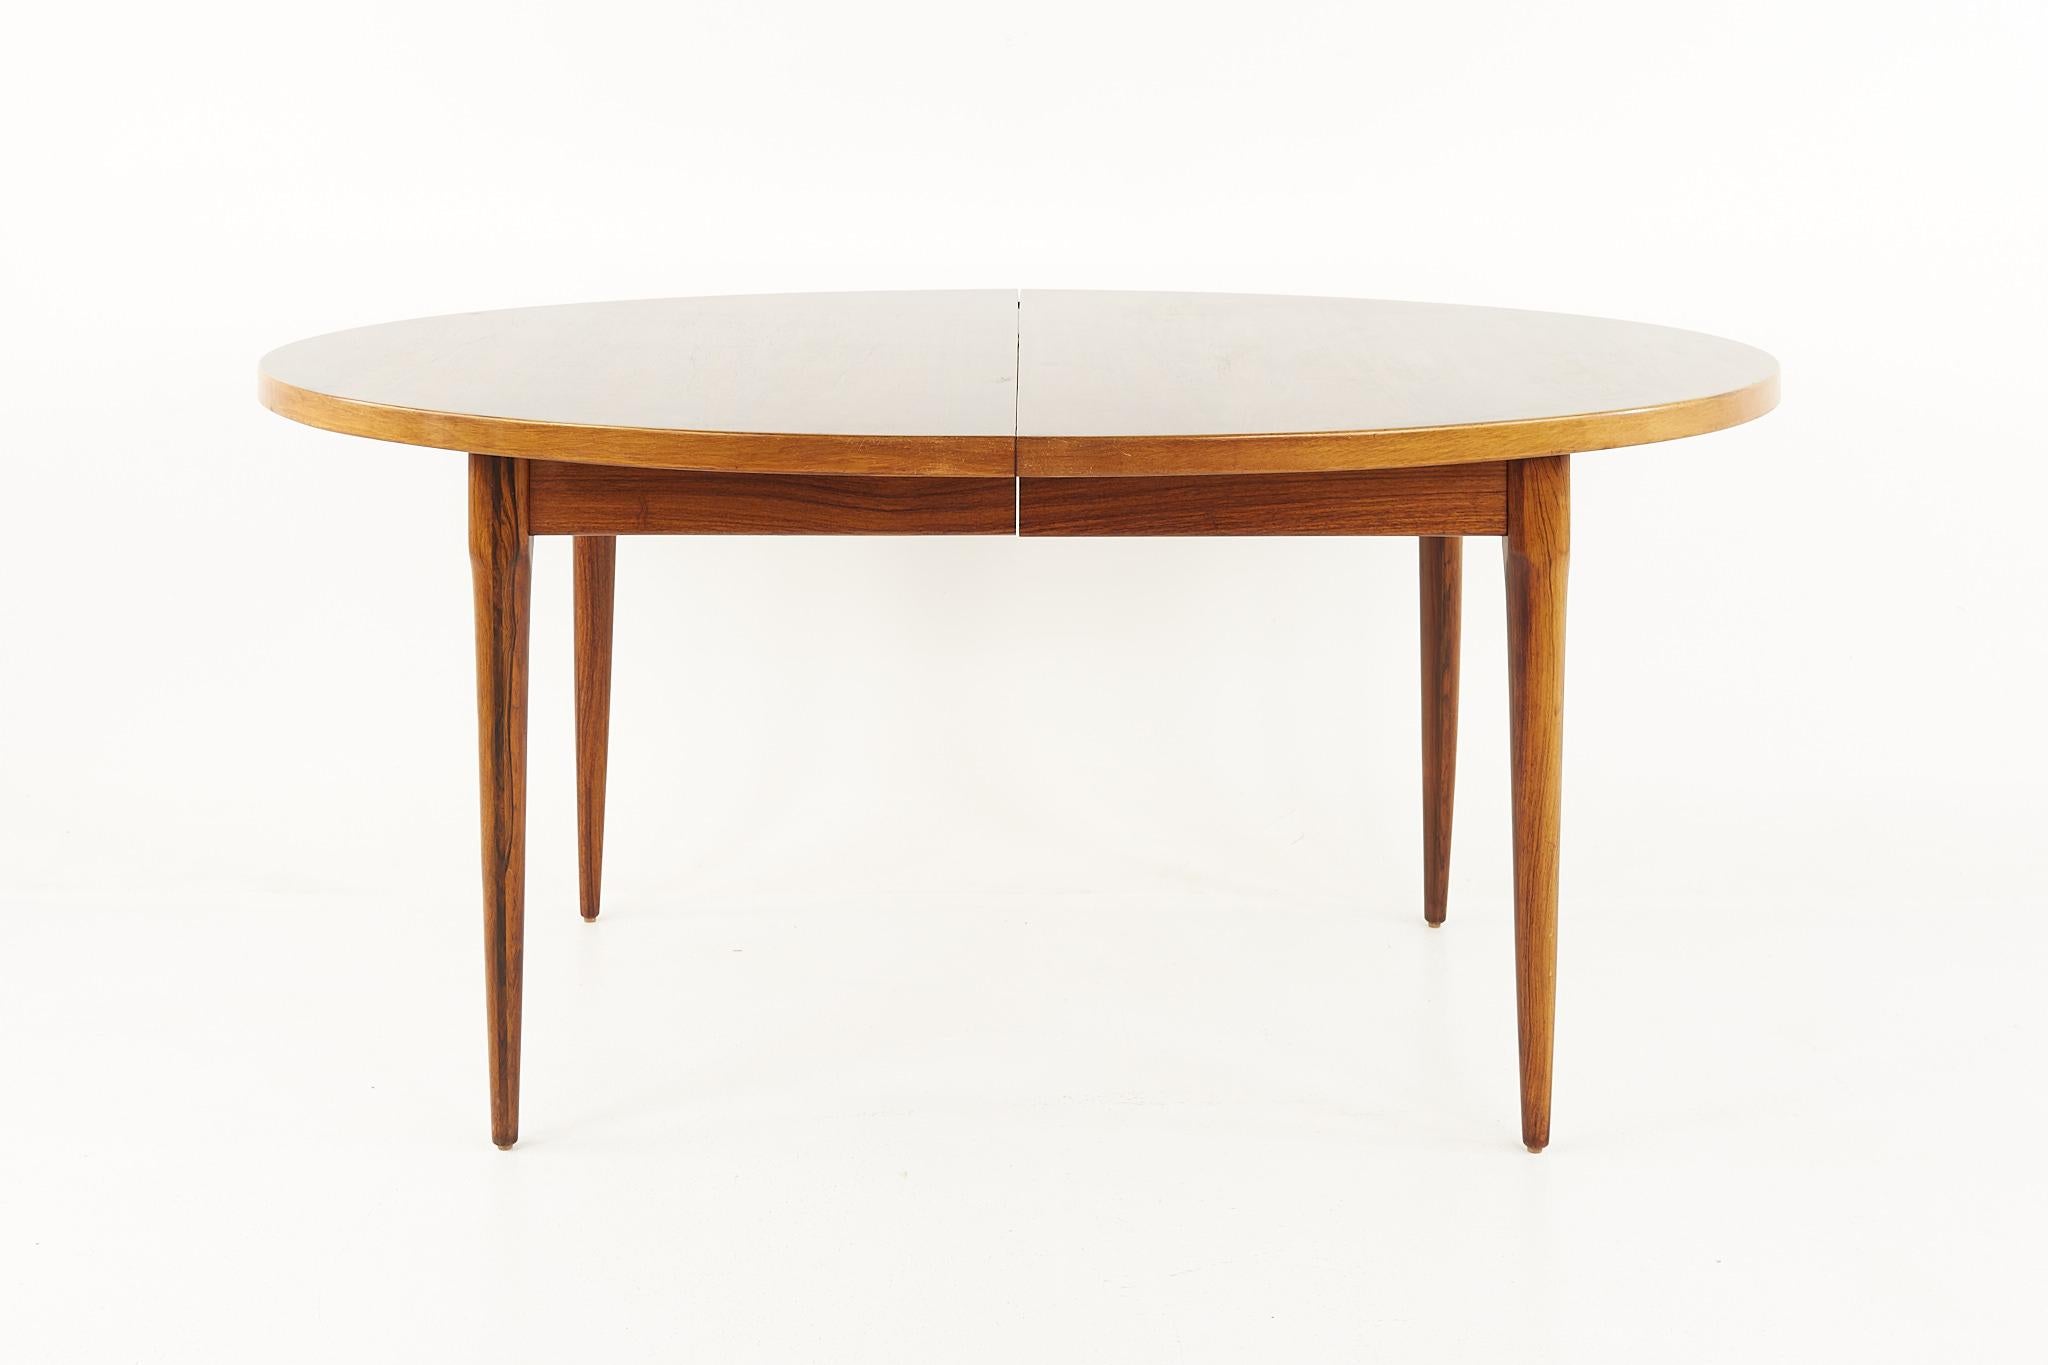 Mid-Century Danish rosewood expanding dining table

This table measures: 64 wide x 42.75 deep x 28.75 inches high, with a chair clearance of 24 inches, each of the 3 leaves are 12 inches wide, making a maximum table width of 100 inches

All